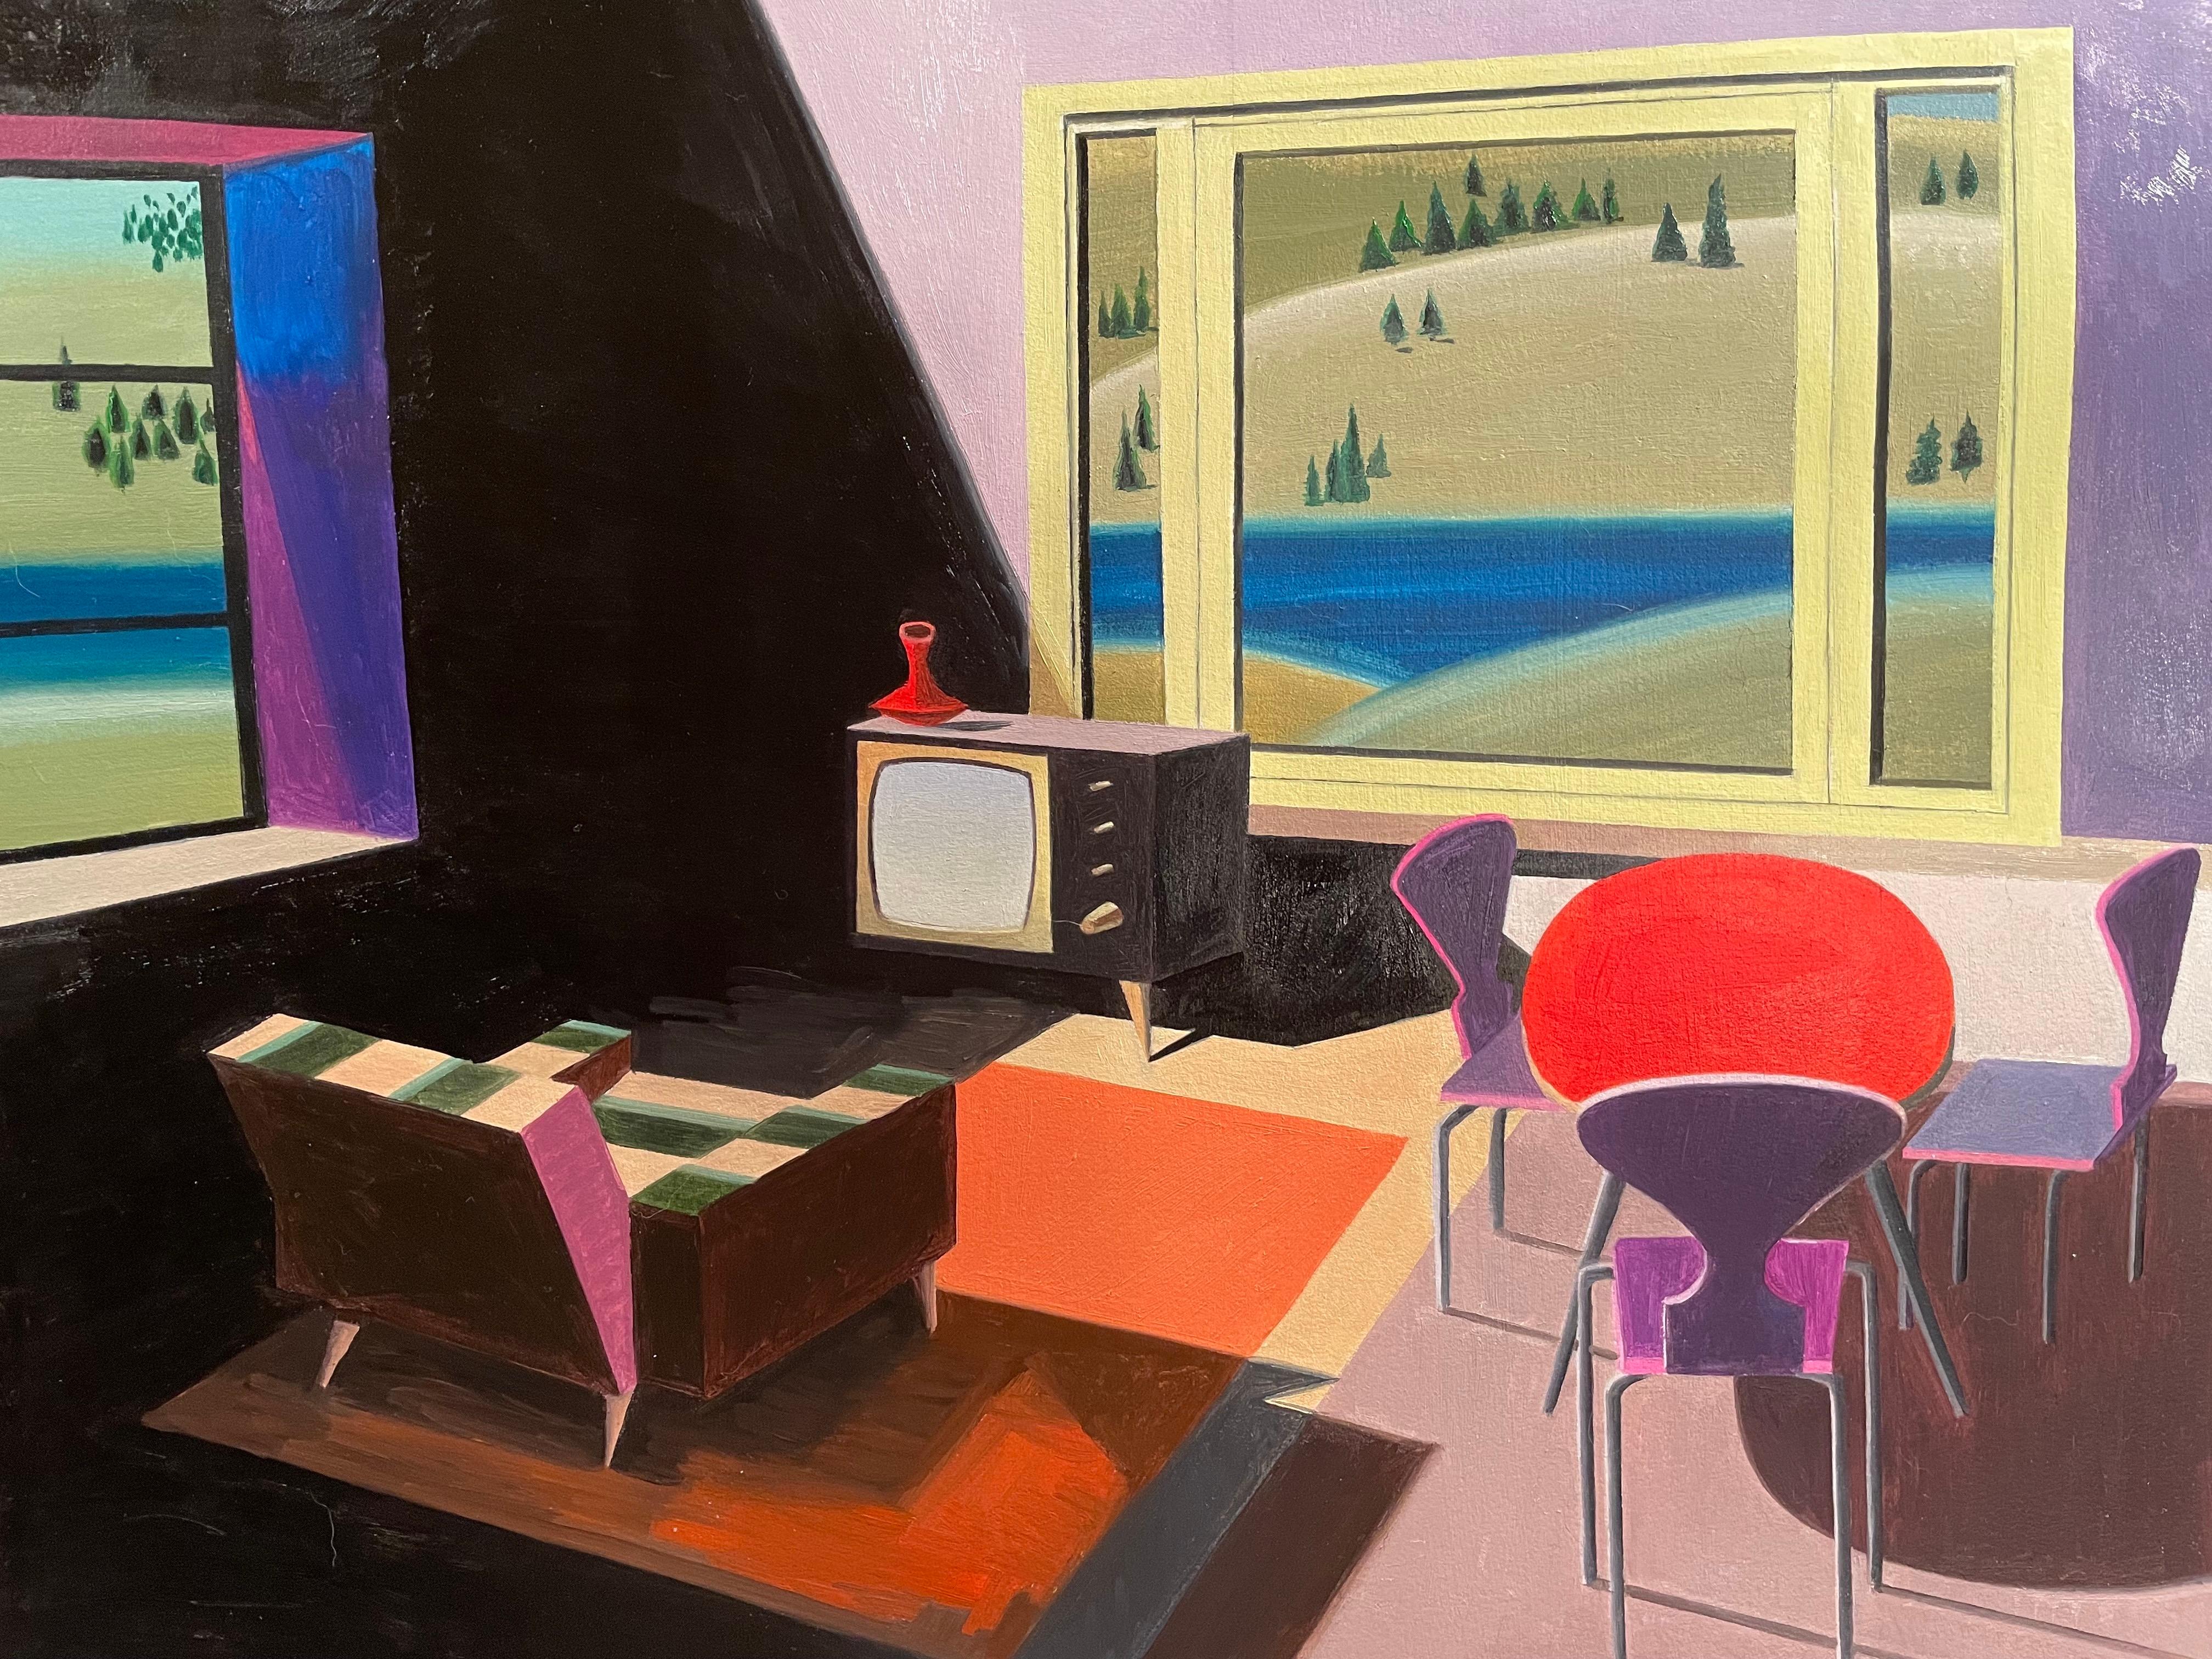 Kathy Osborn Figurative Painting - Nothing's On, figurative oil painting of 1950s interior, purple and red